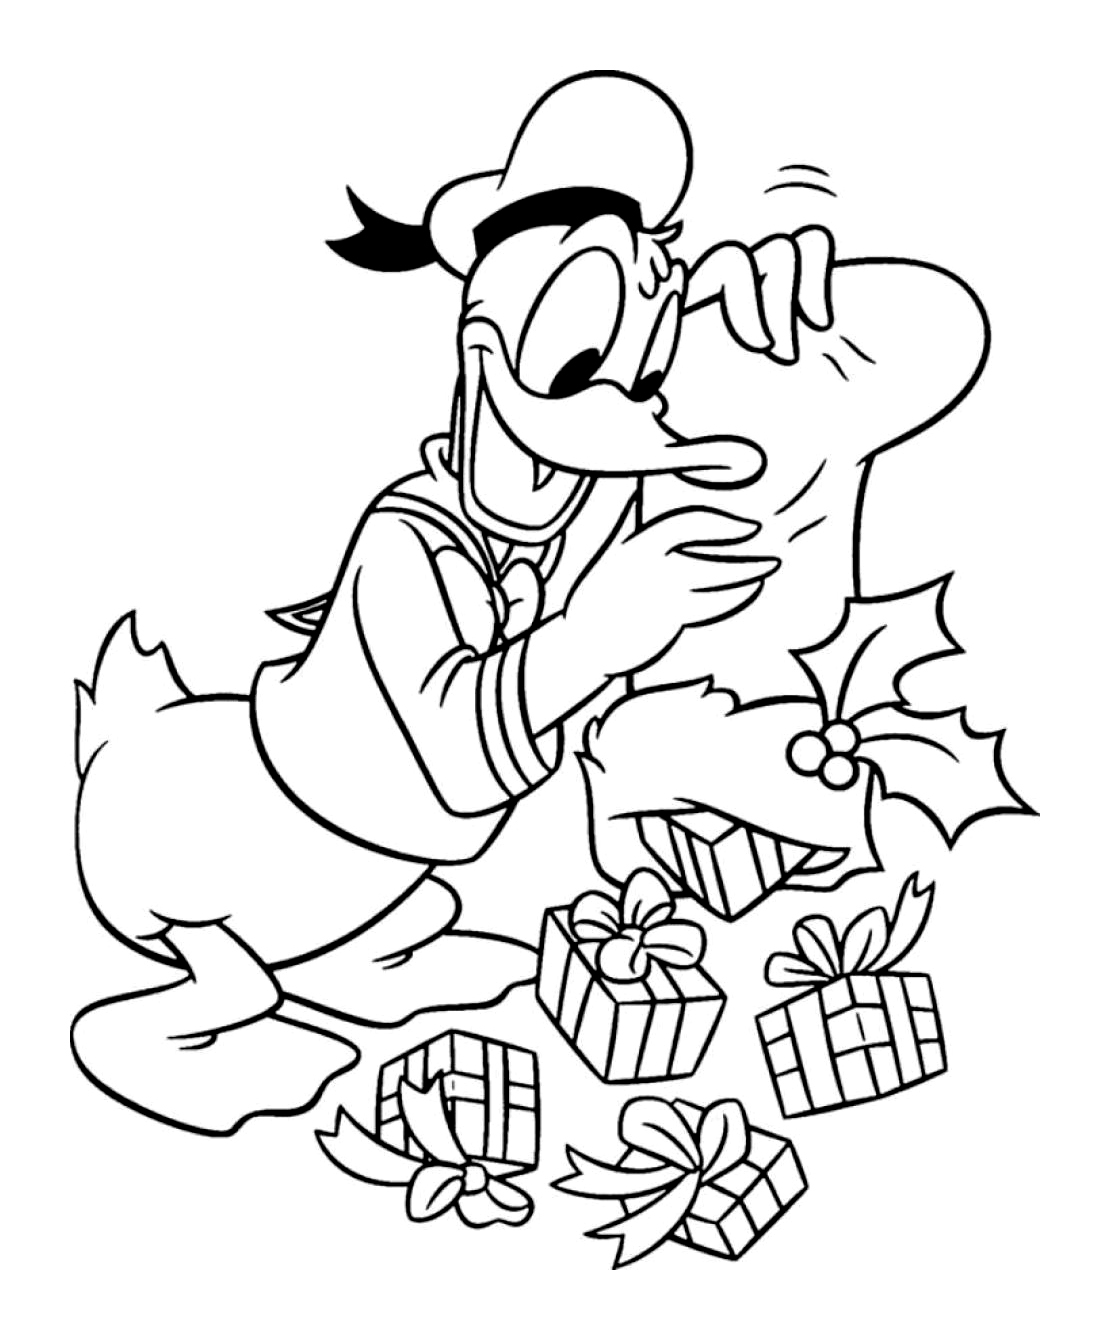 Donald coloring page with few details for kids